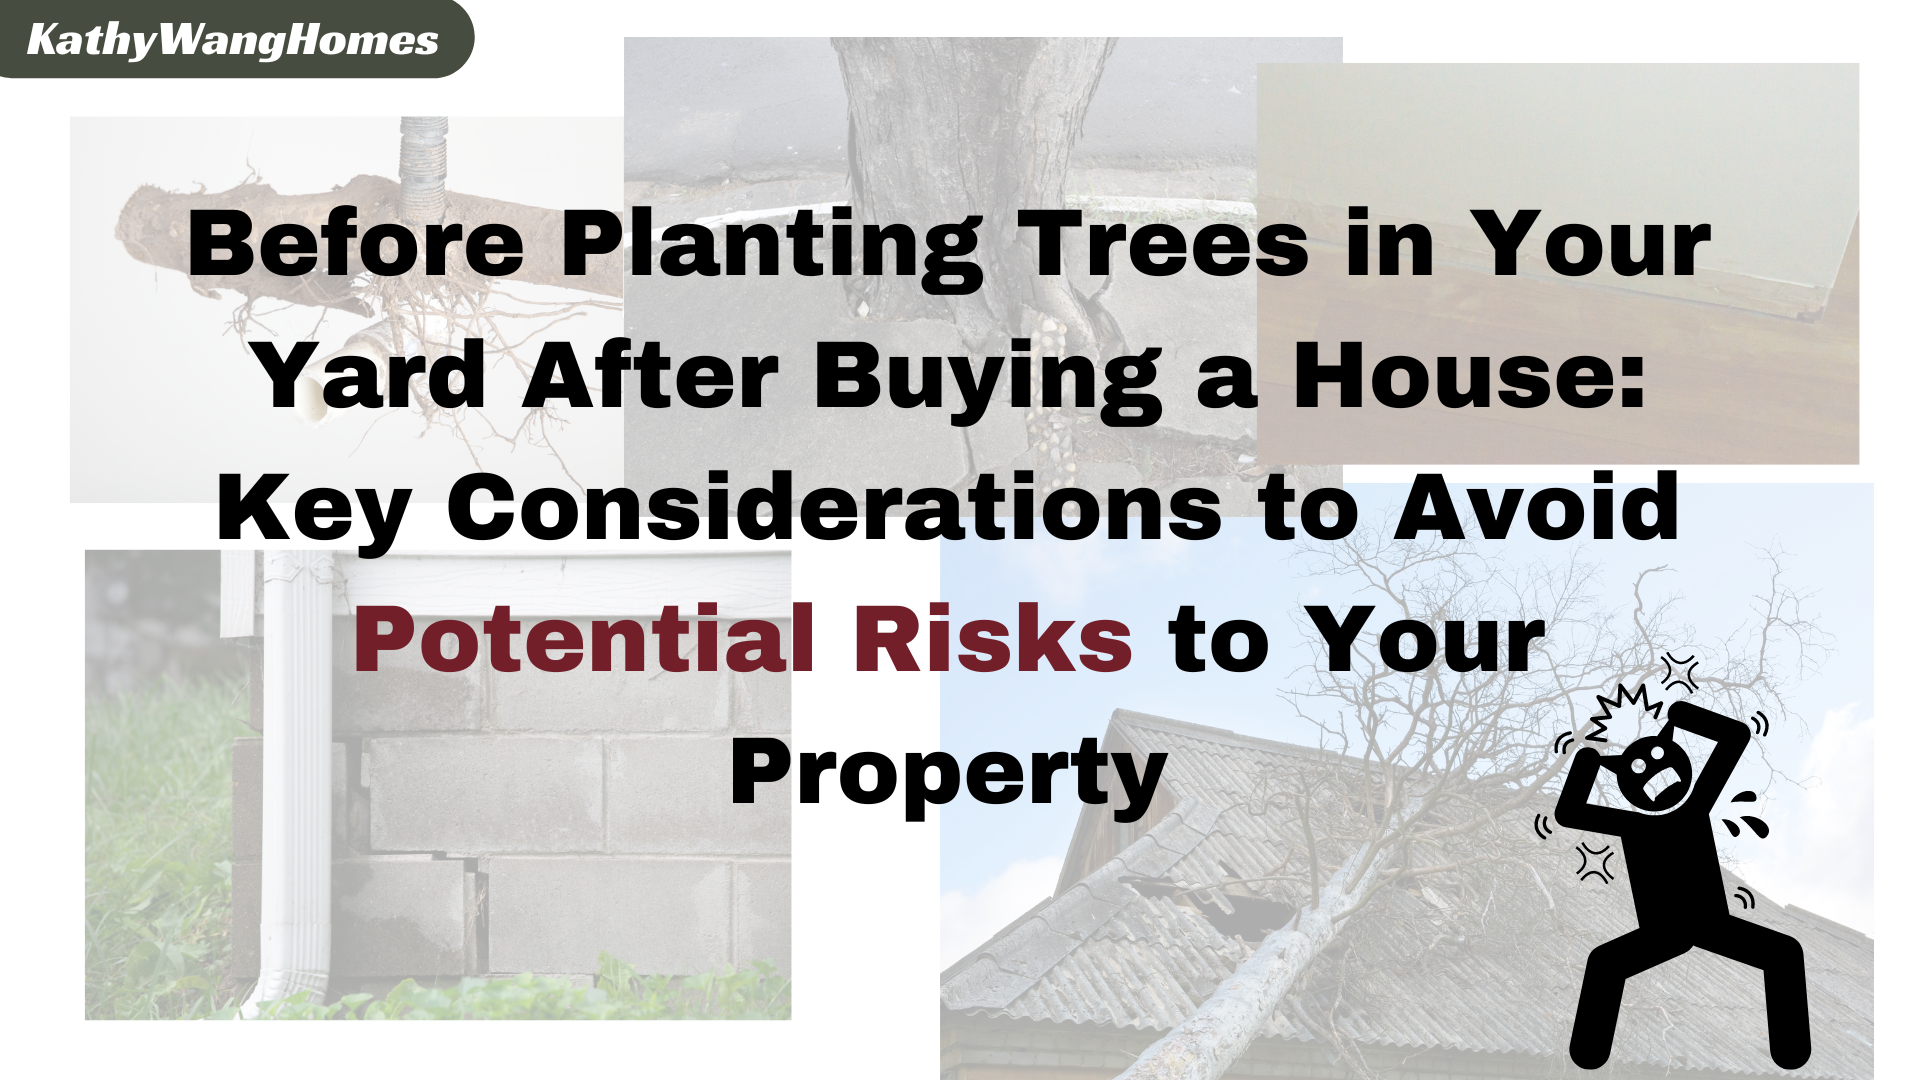 Before Planting Trees in Your Yard After Buying a House: Key Considerations to Avoid Potential Risks to Your Property